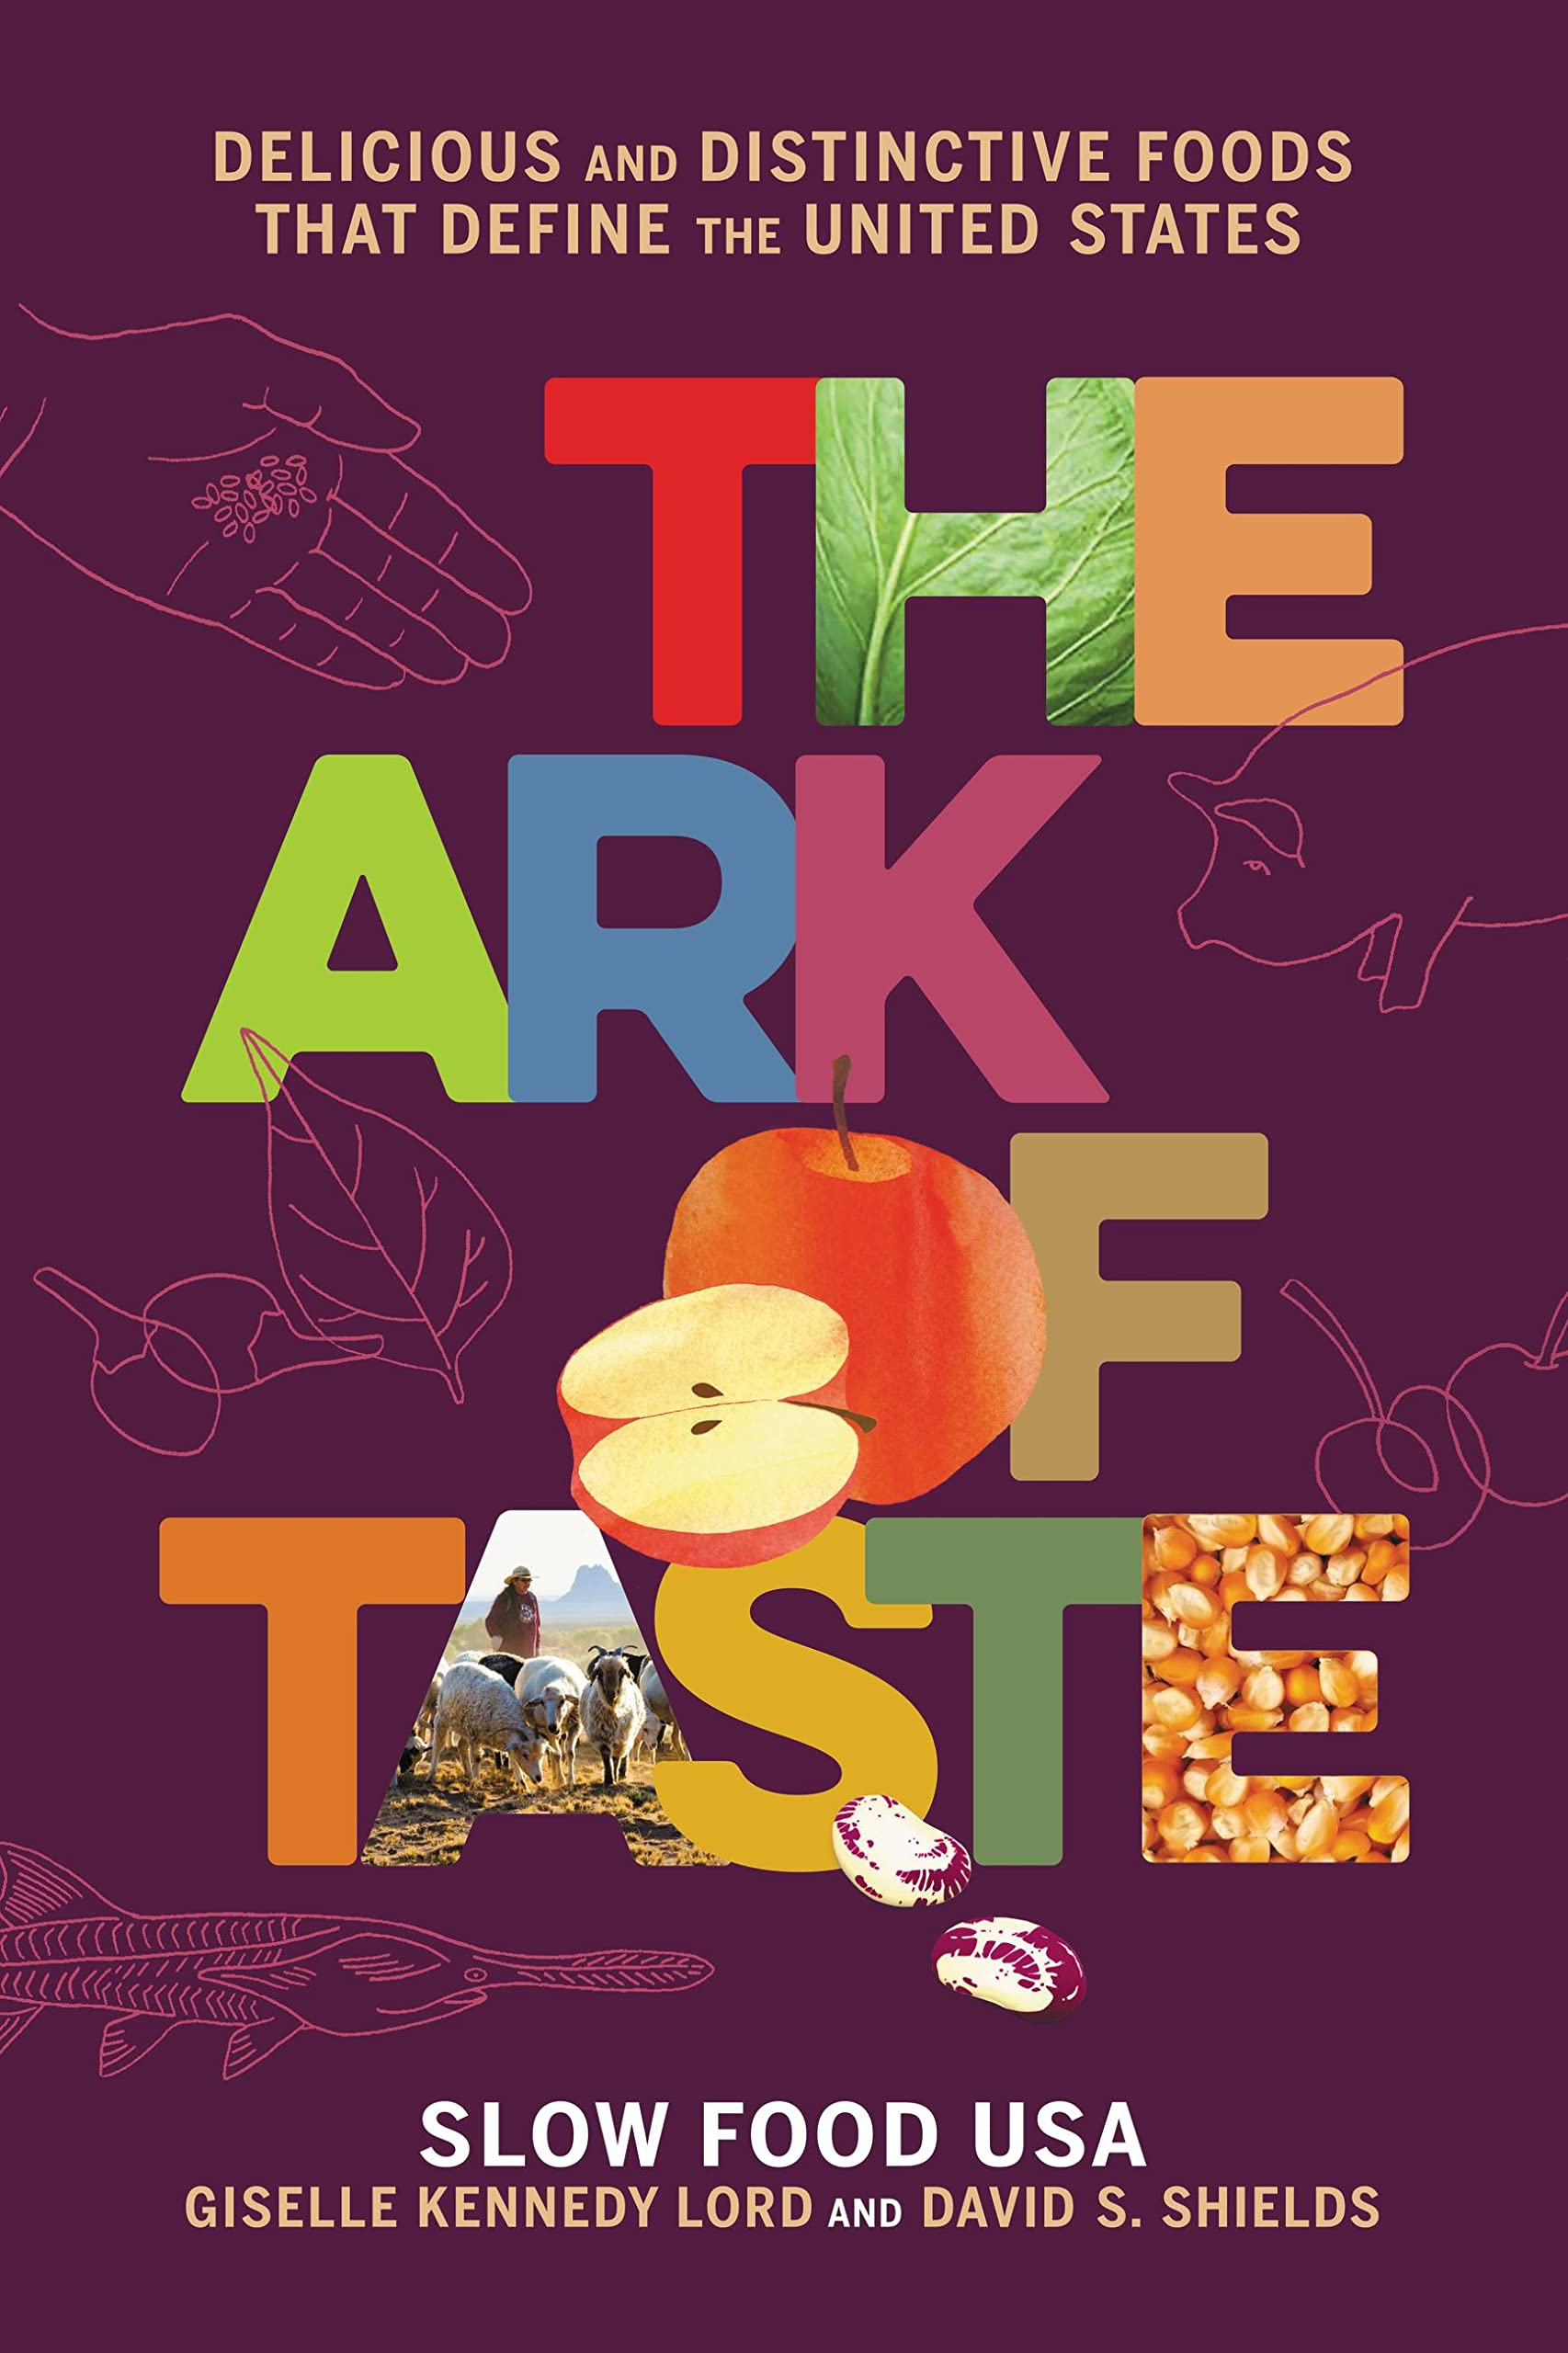 The Ark of Taste: Delicious and Distinctive Foods That Define the United States (Giselle Kennedy Lord, David Shields)